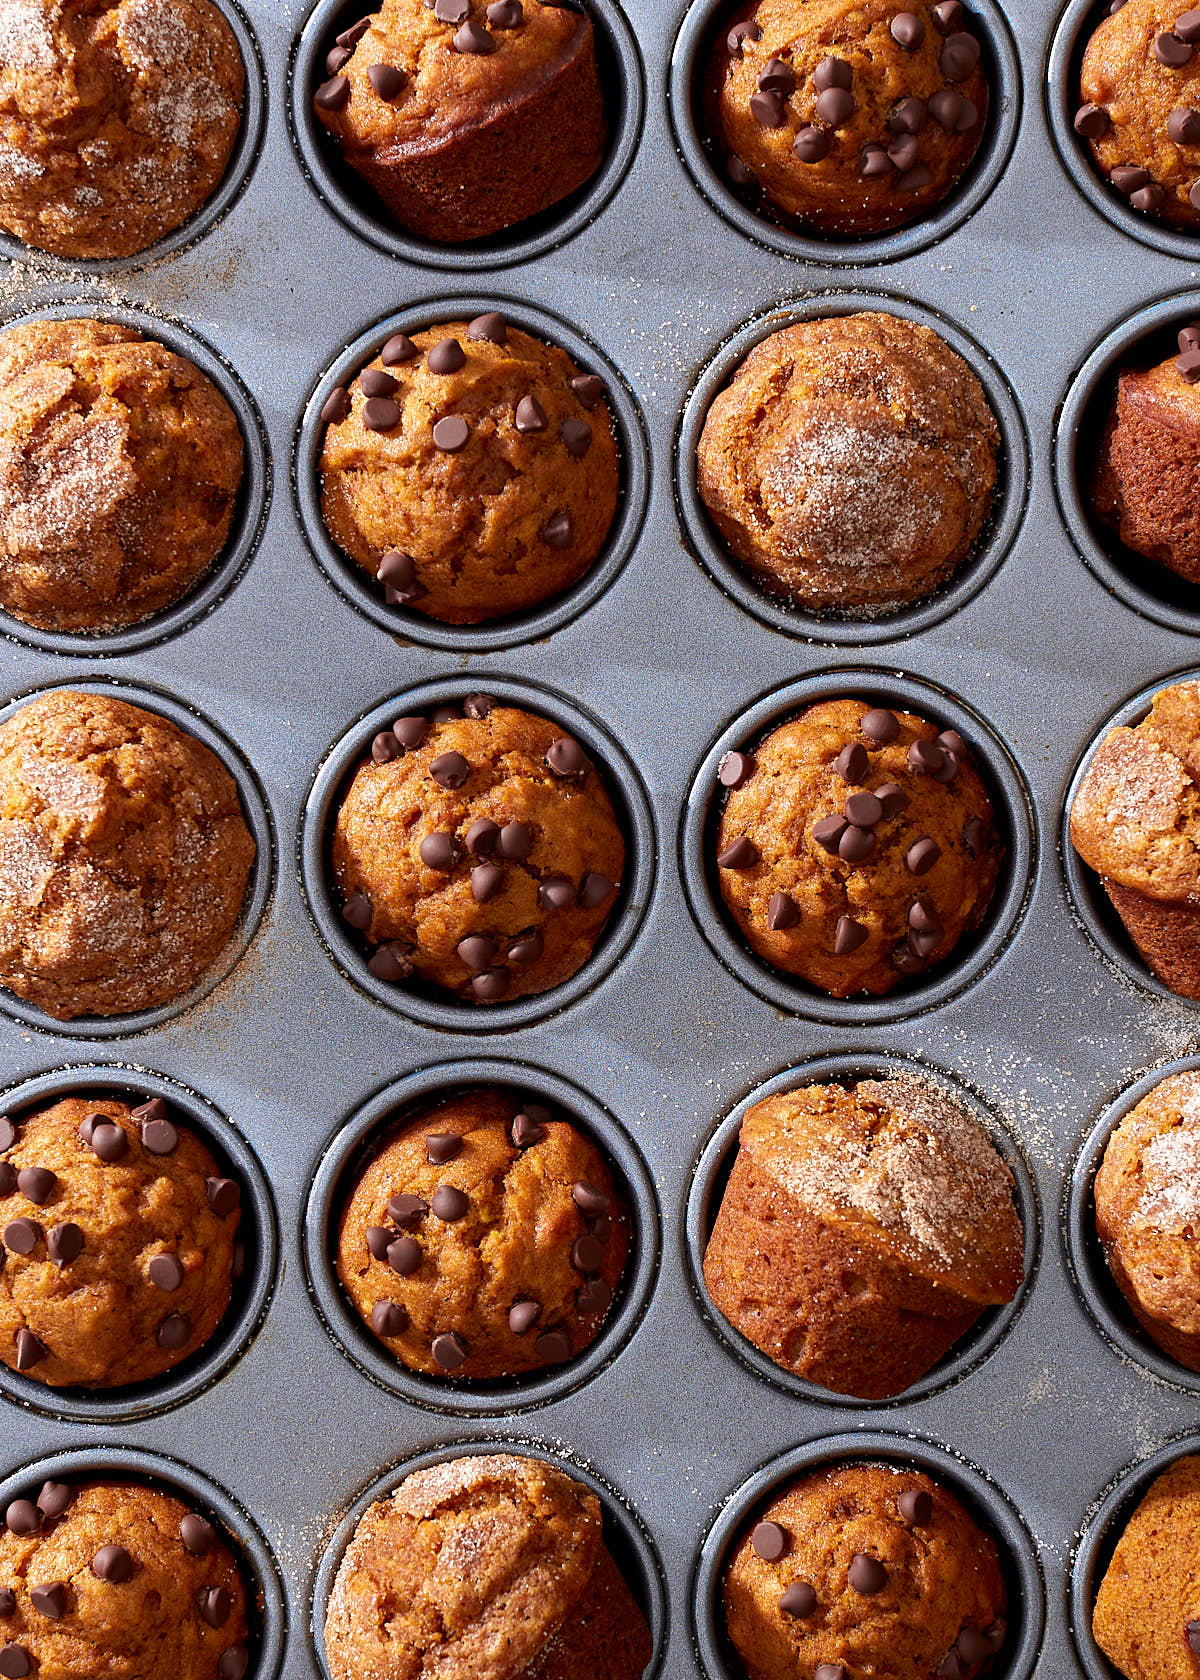 Mini pumpkin muffins, topped with cinnamon sugar and chocolate chips, in a muffin tin.